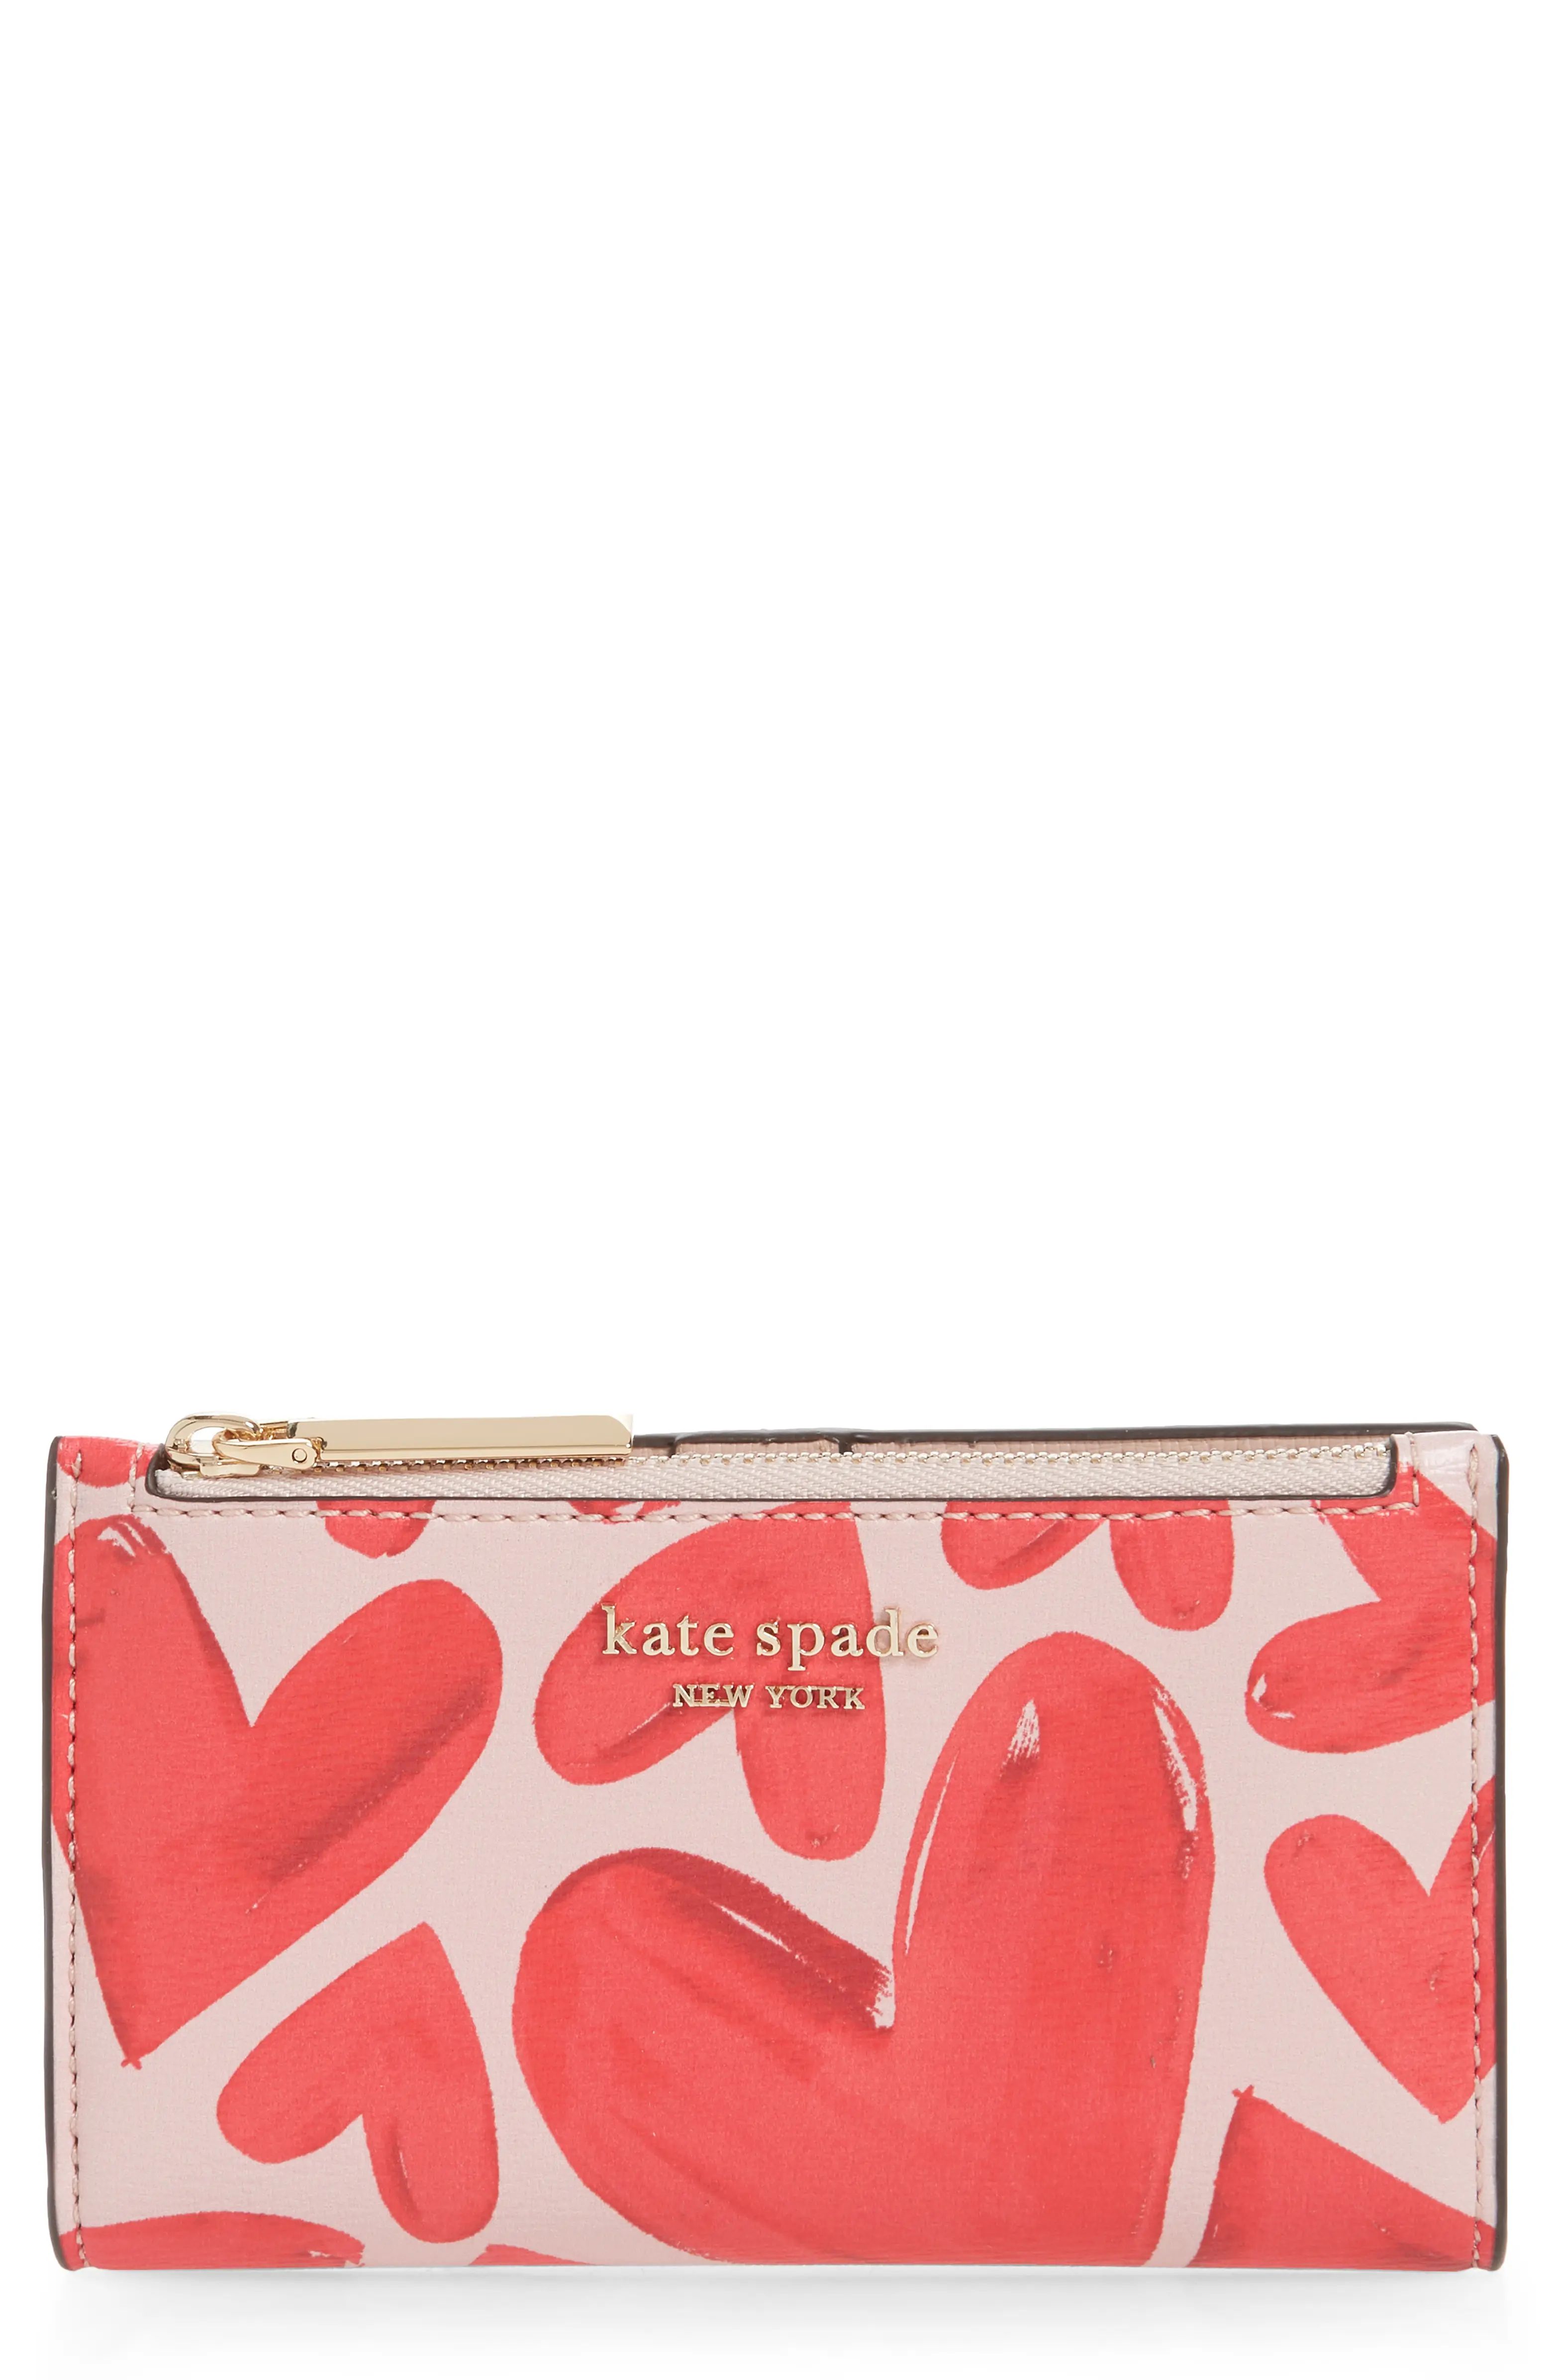 Small in scale but not in capacity, this chic bifold wallet works in a wink with a zip pull style... | Nordstrom